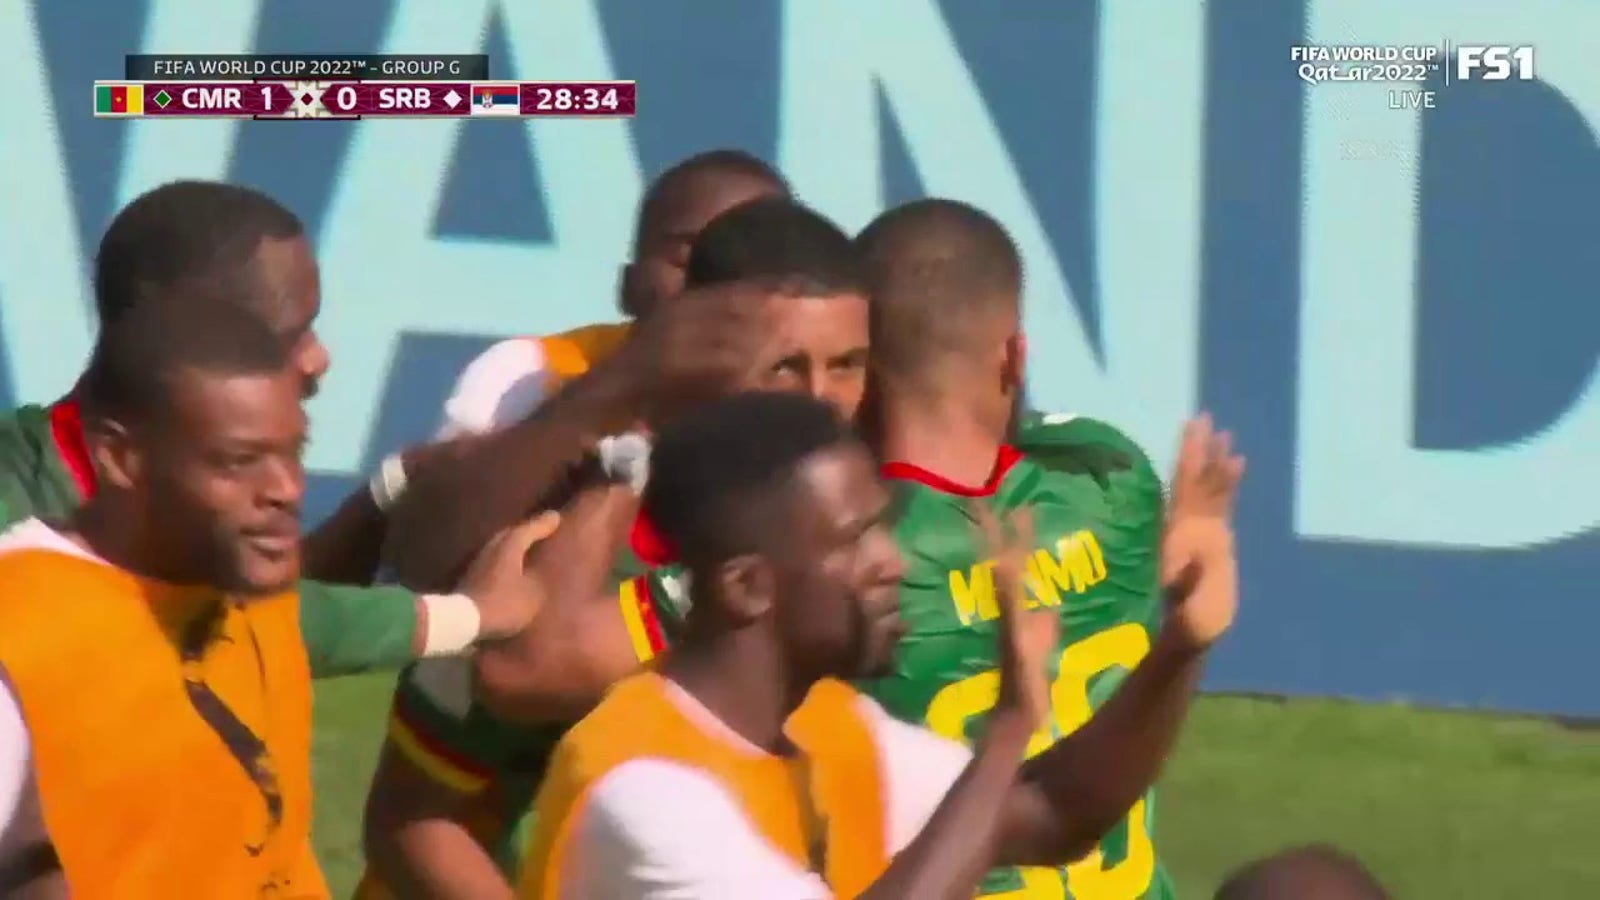 Cameroon's Jean-Charles Castelletto scores against Serbia in the 29'